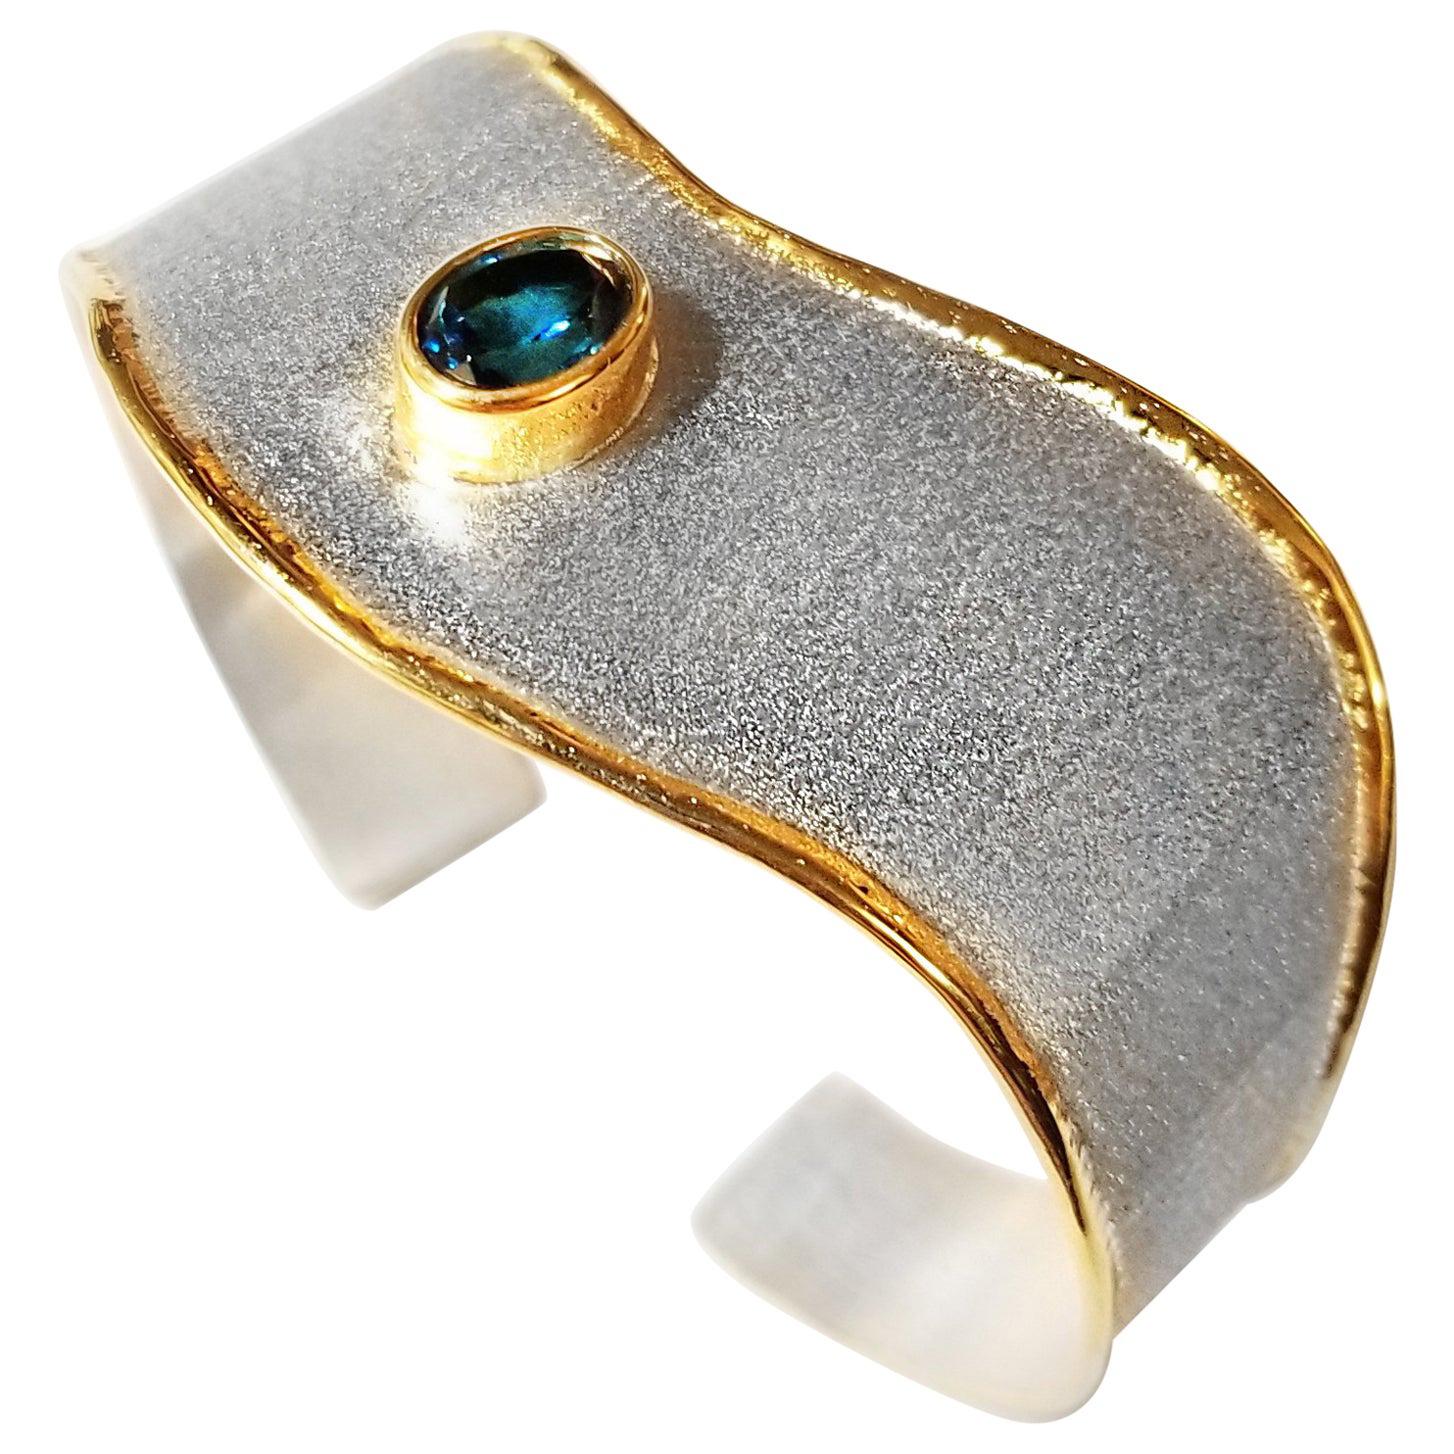 Yianni Creations Blue Topaz Fine Silver and 24 Karat Gold Two-Tone Cuff Bracelet